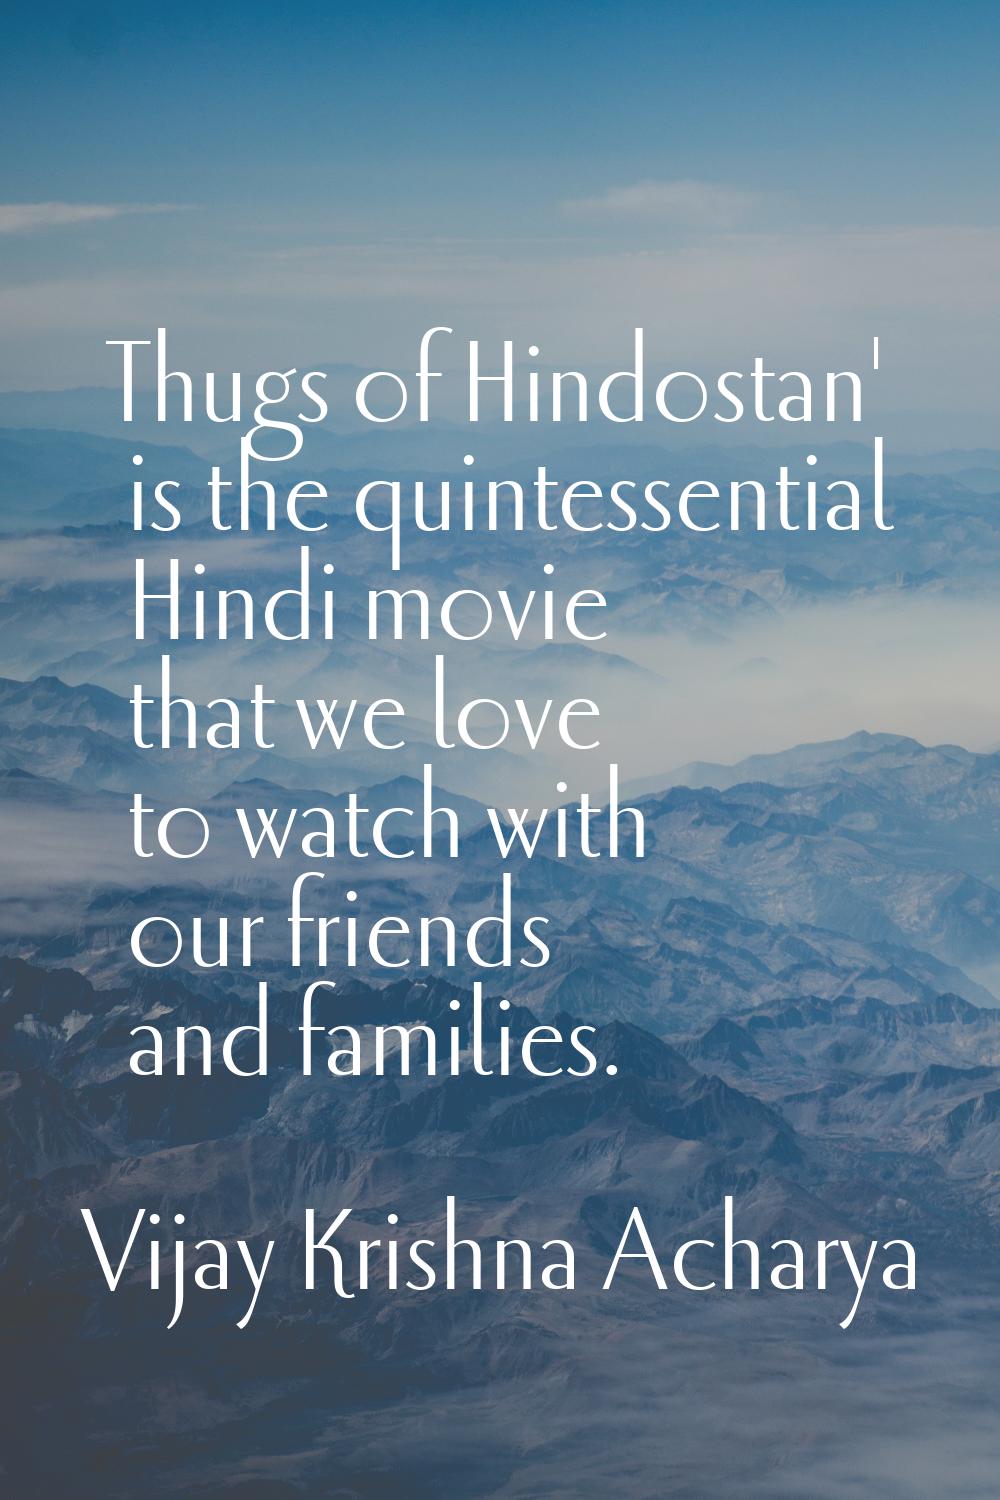 Thugs of Hindostan' is the quintessential Hindi movie that we love to watch with our friends and fa